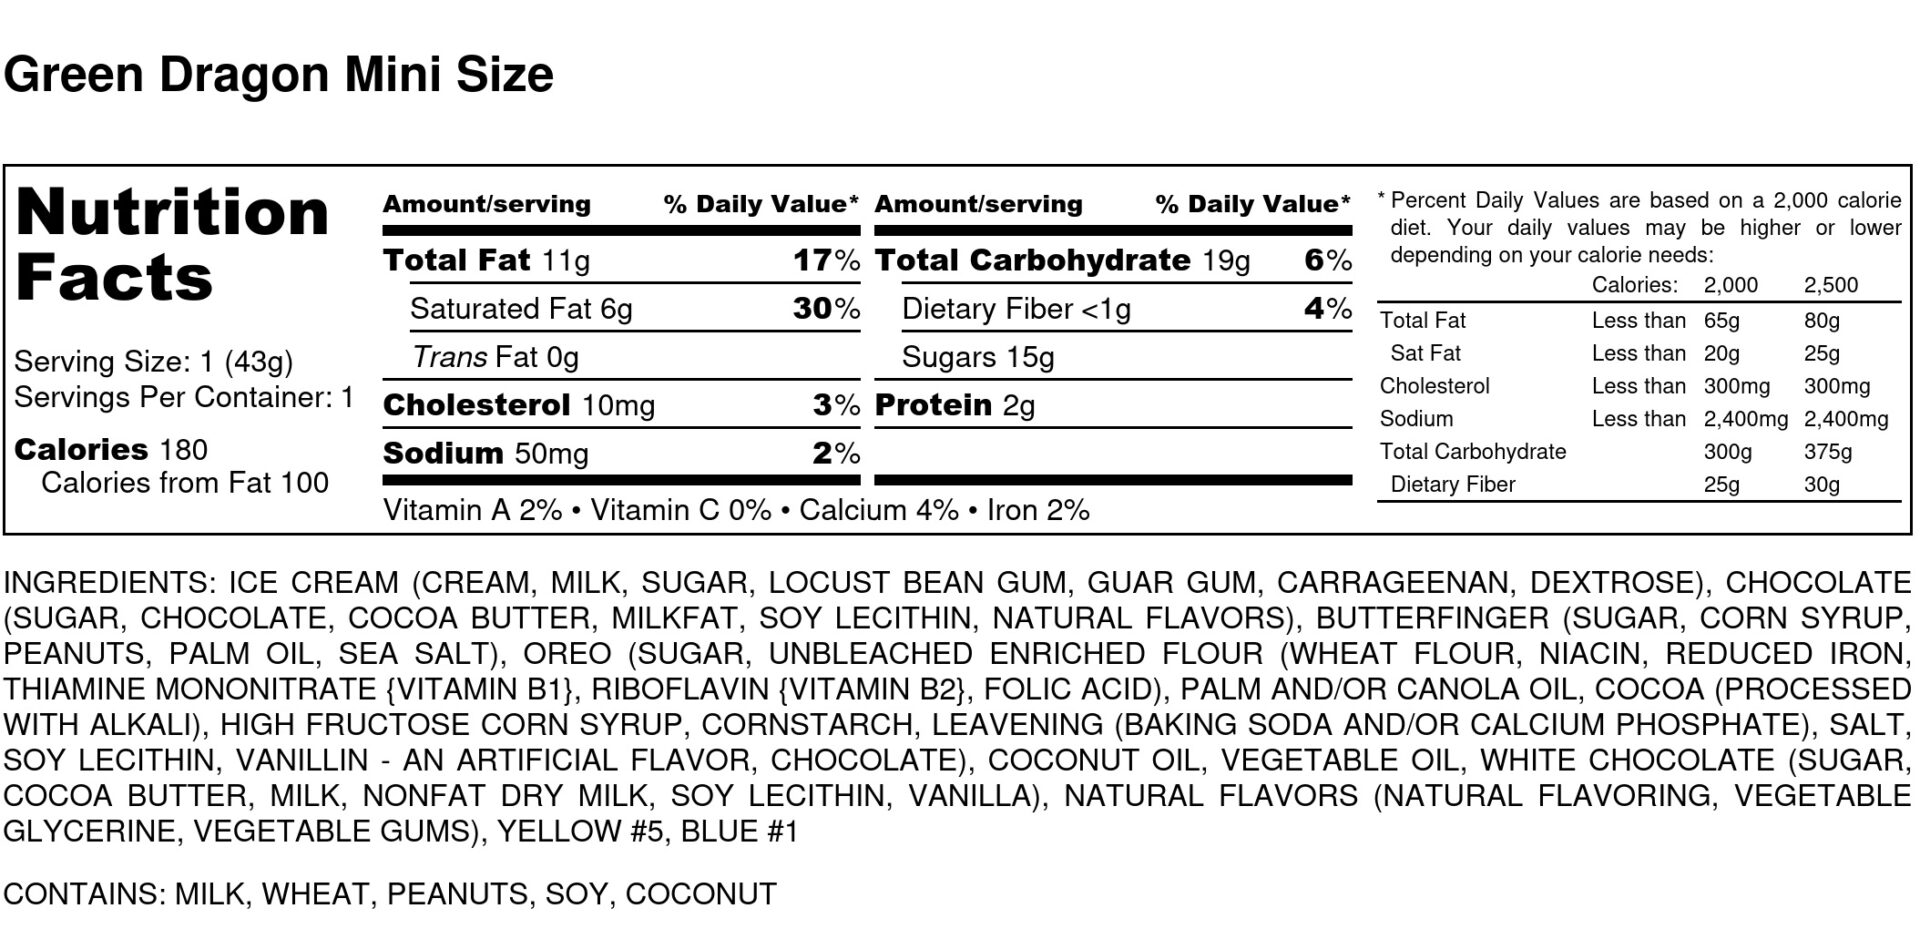 Green Dragon Mini Size Nutrition Label scaled